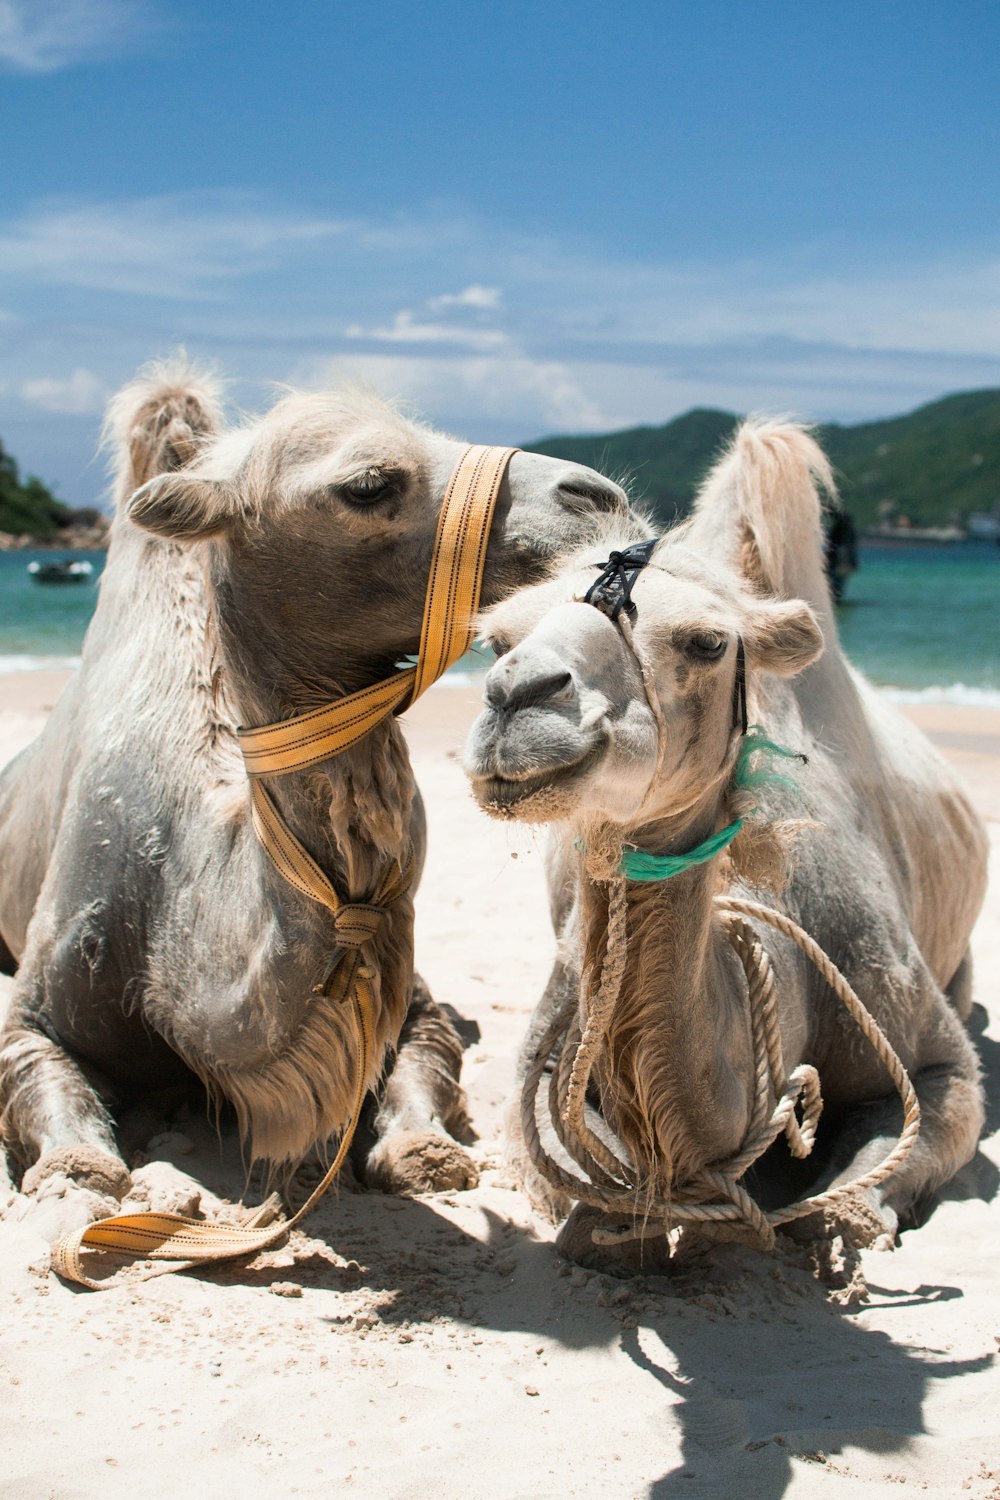 two grey camels